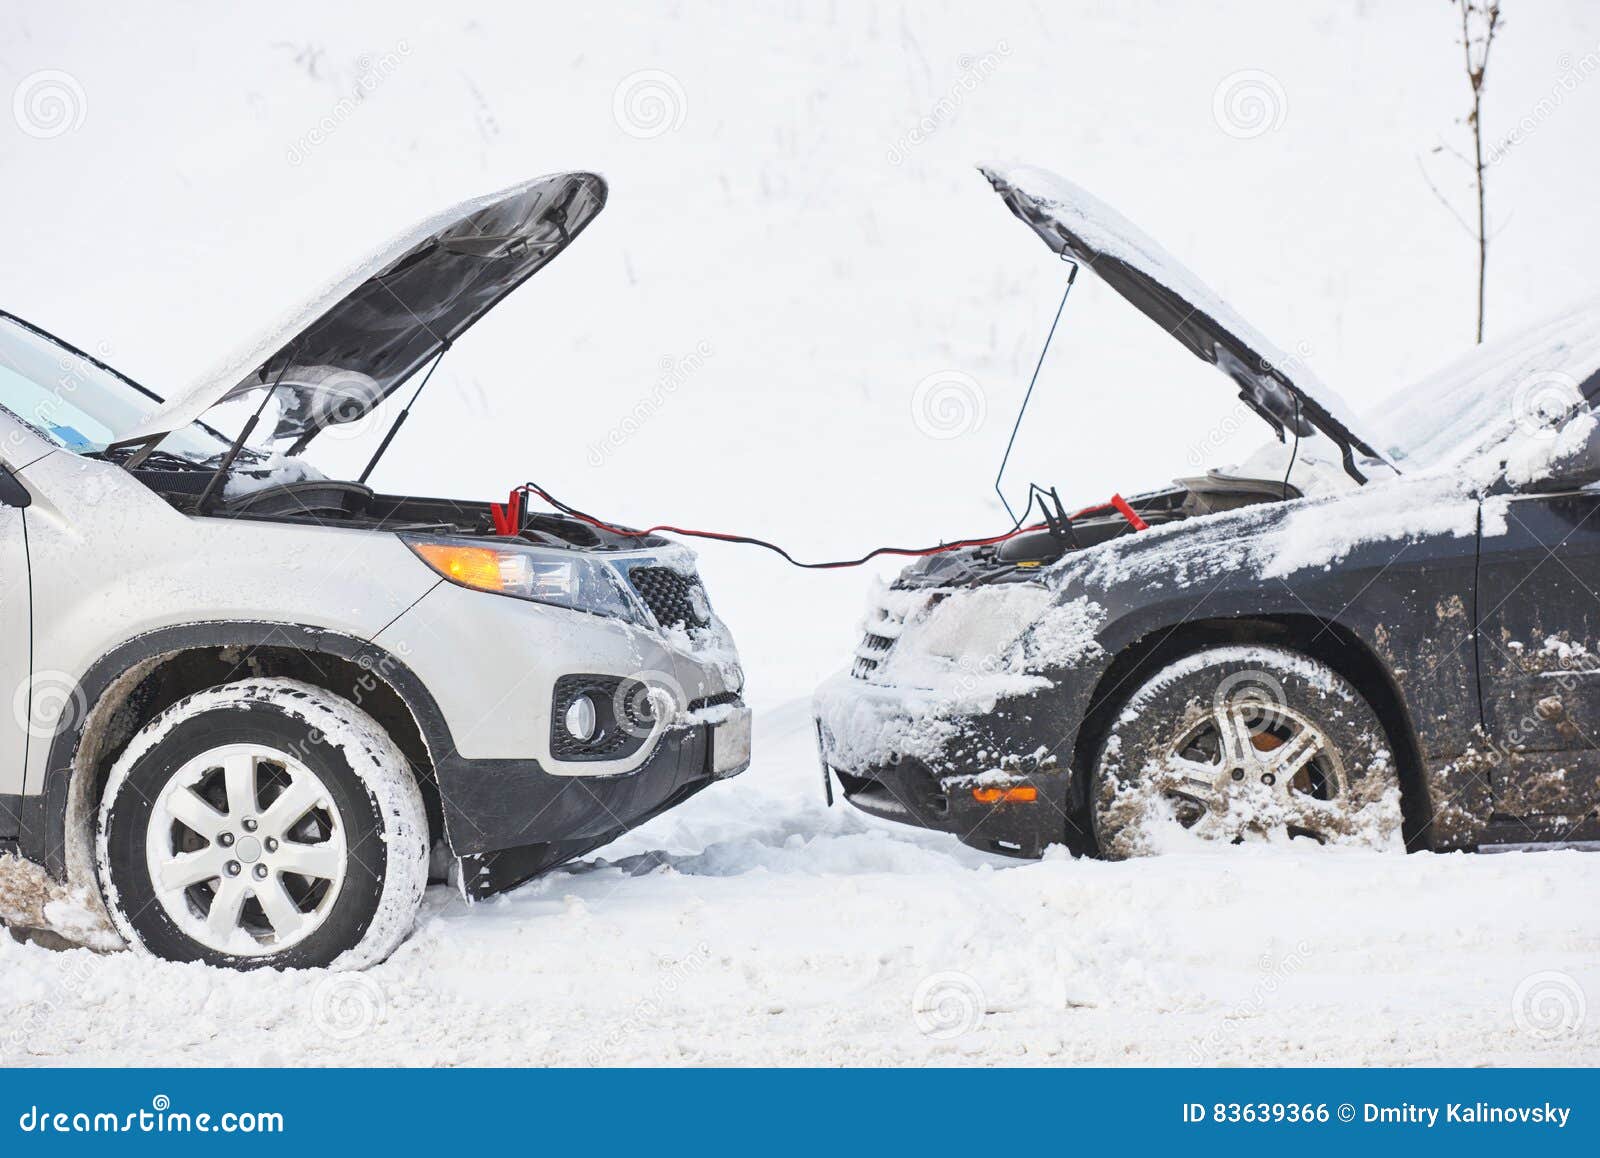 charging automobile discharged battery by booster jumper cables at winter